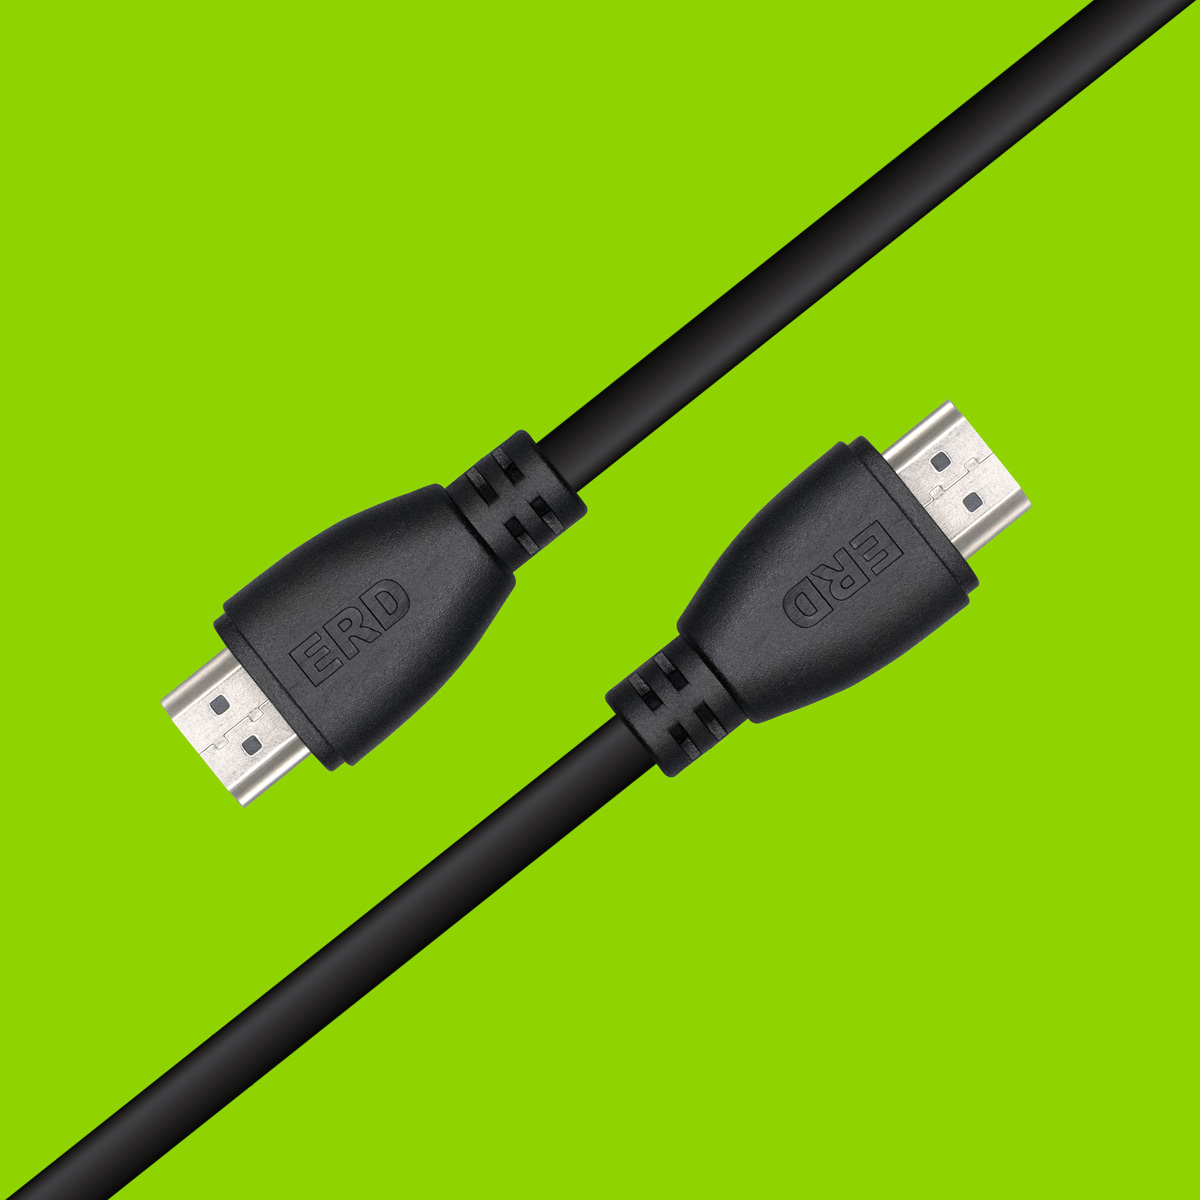 ERD High Speed HDMI Cable HC-11 (1.5 Meter)